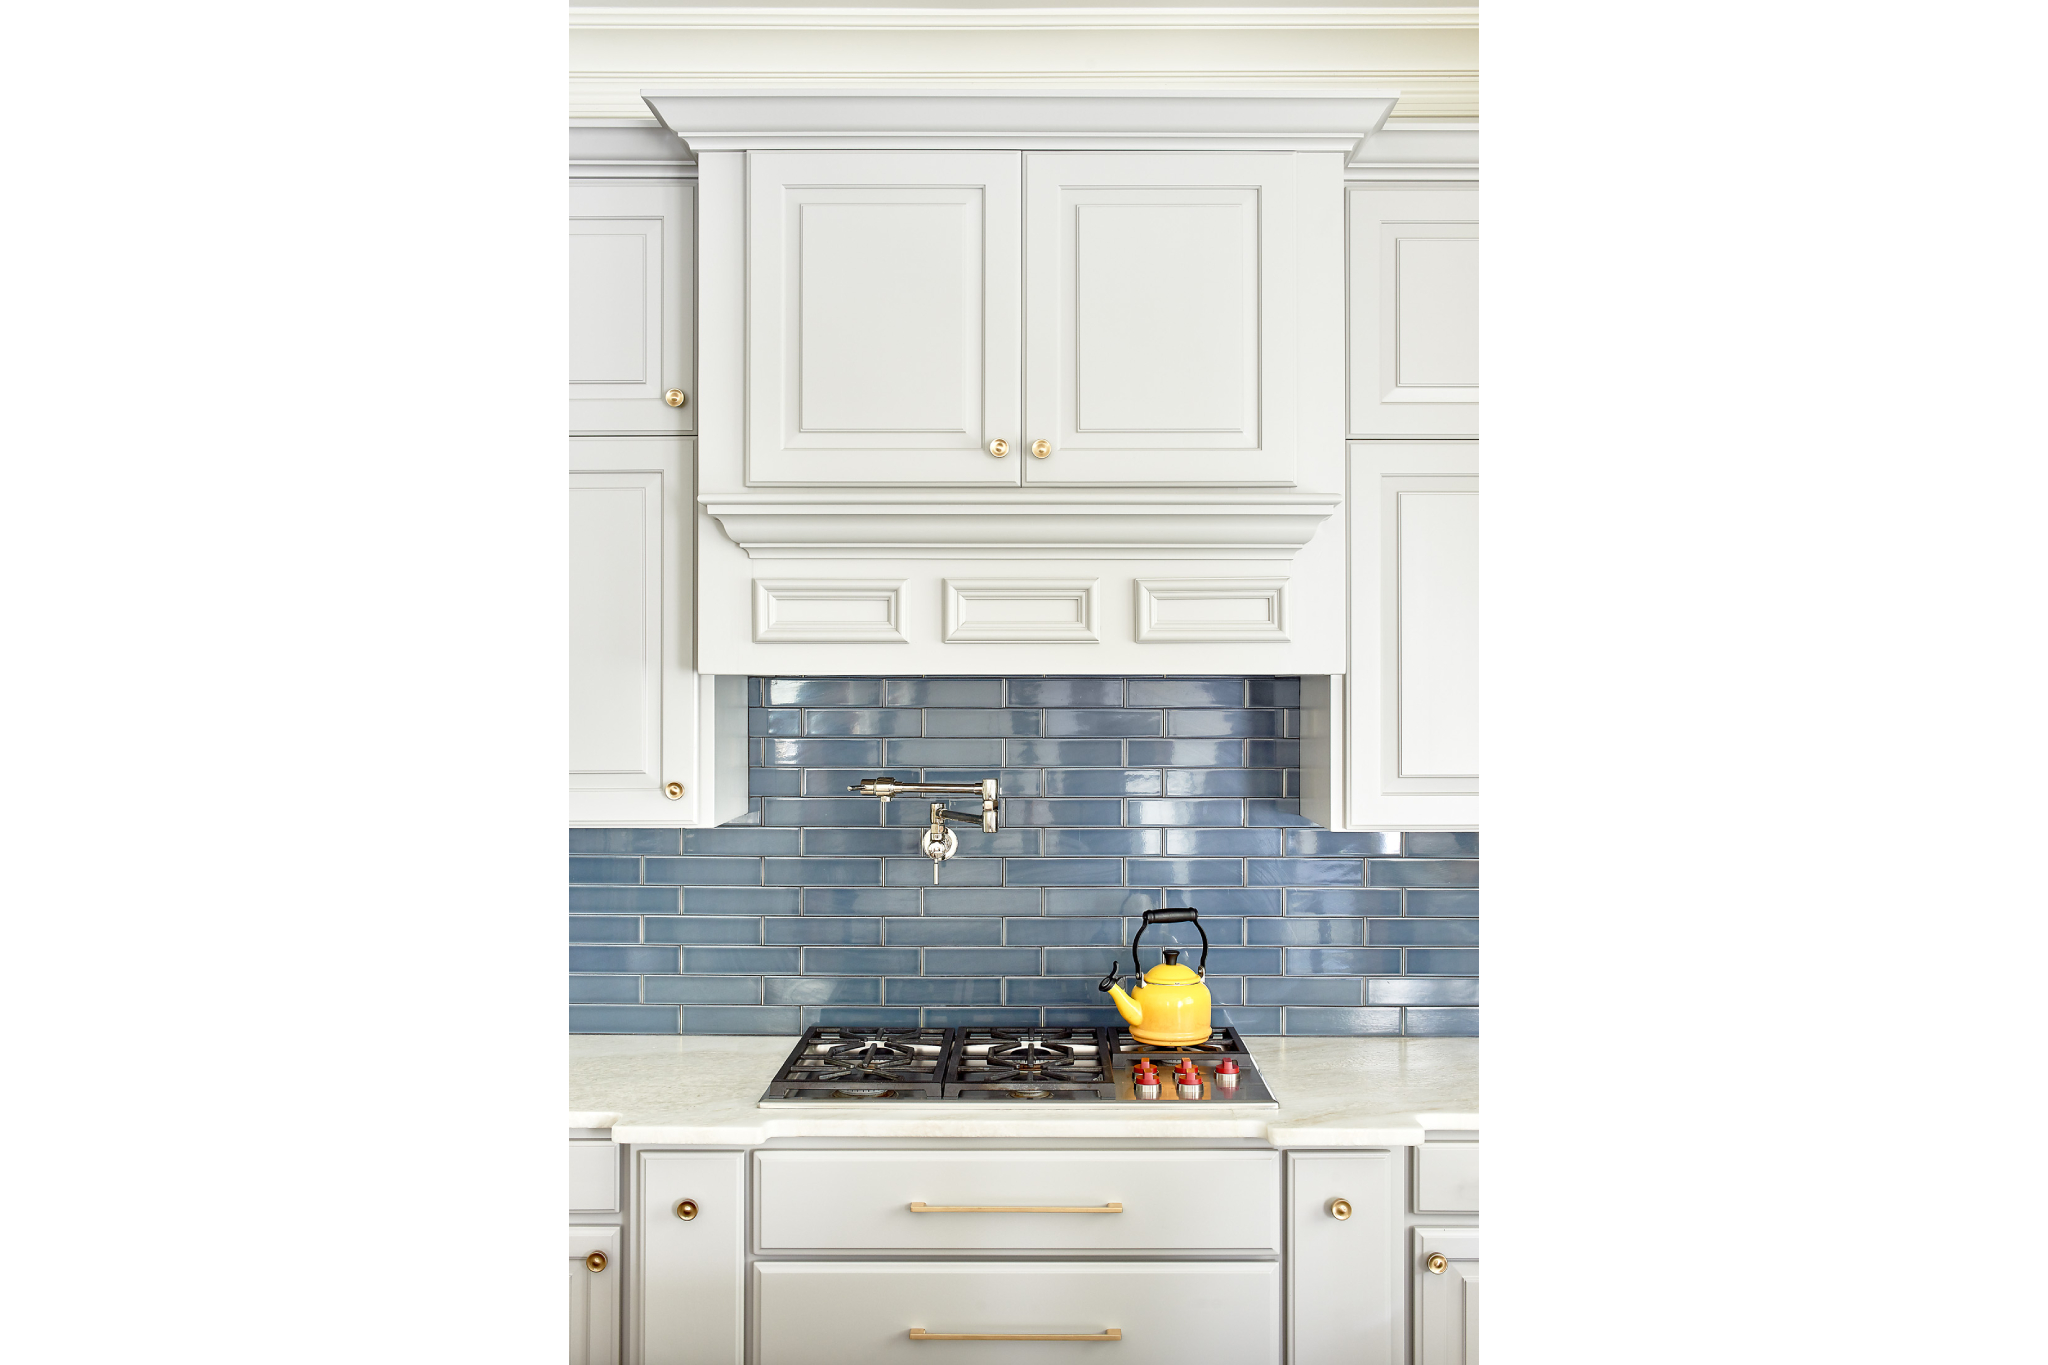 Upgraded kitchen stovetop with custom vent hood, dark blue subway tile, and satin brass accents